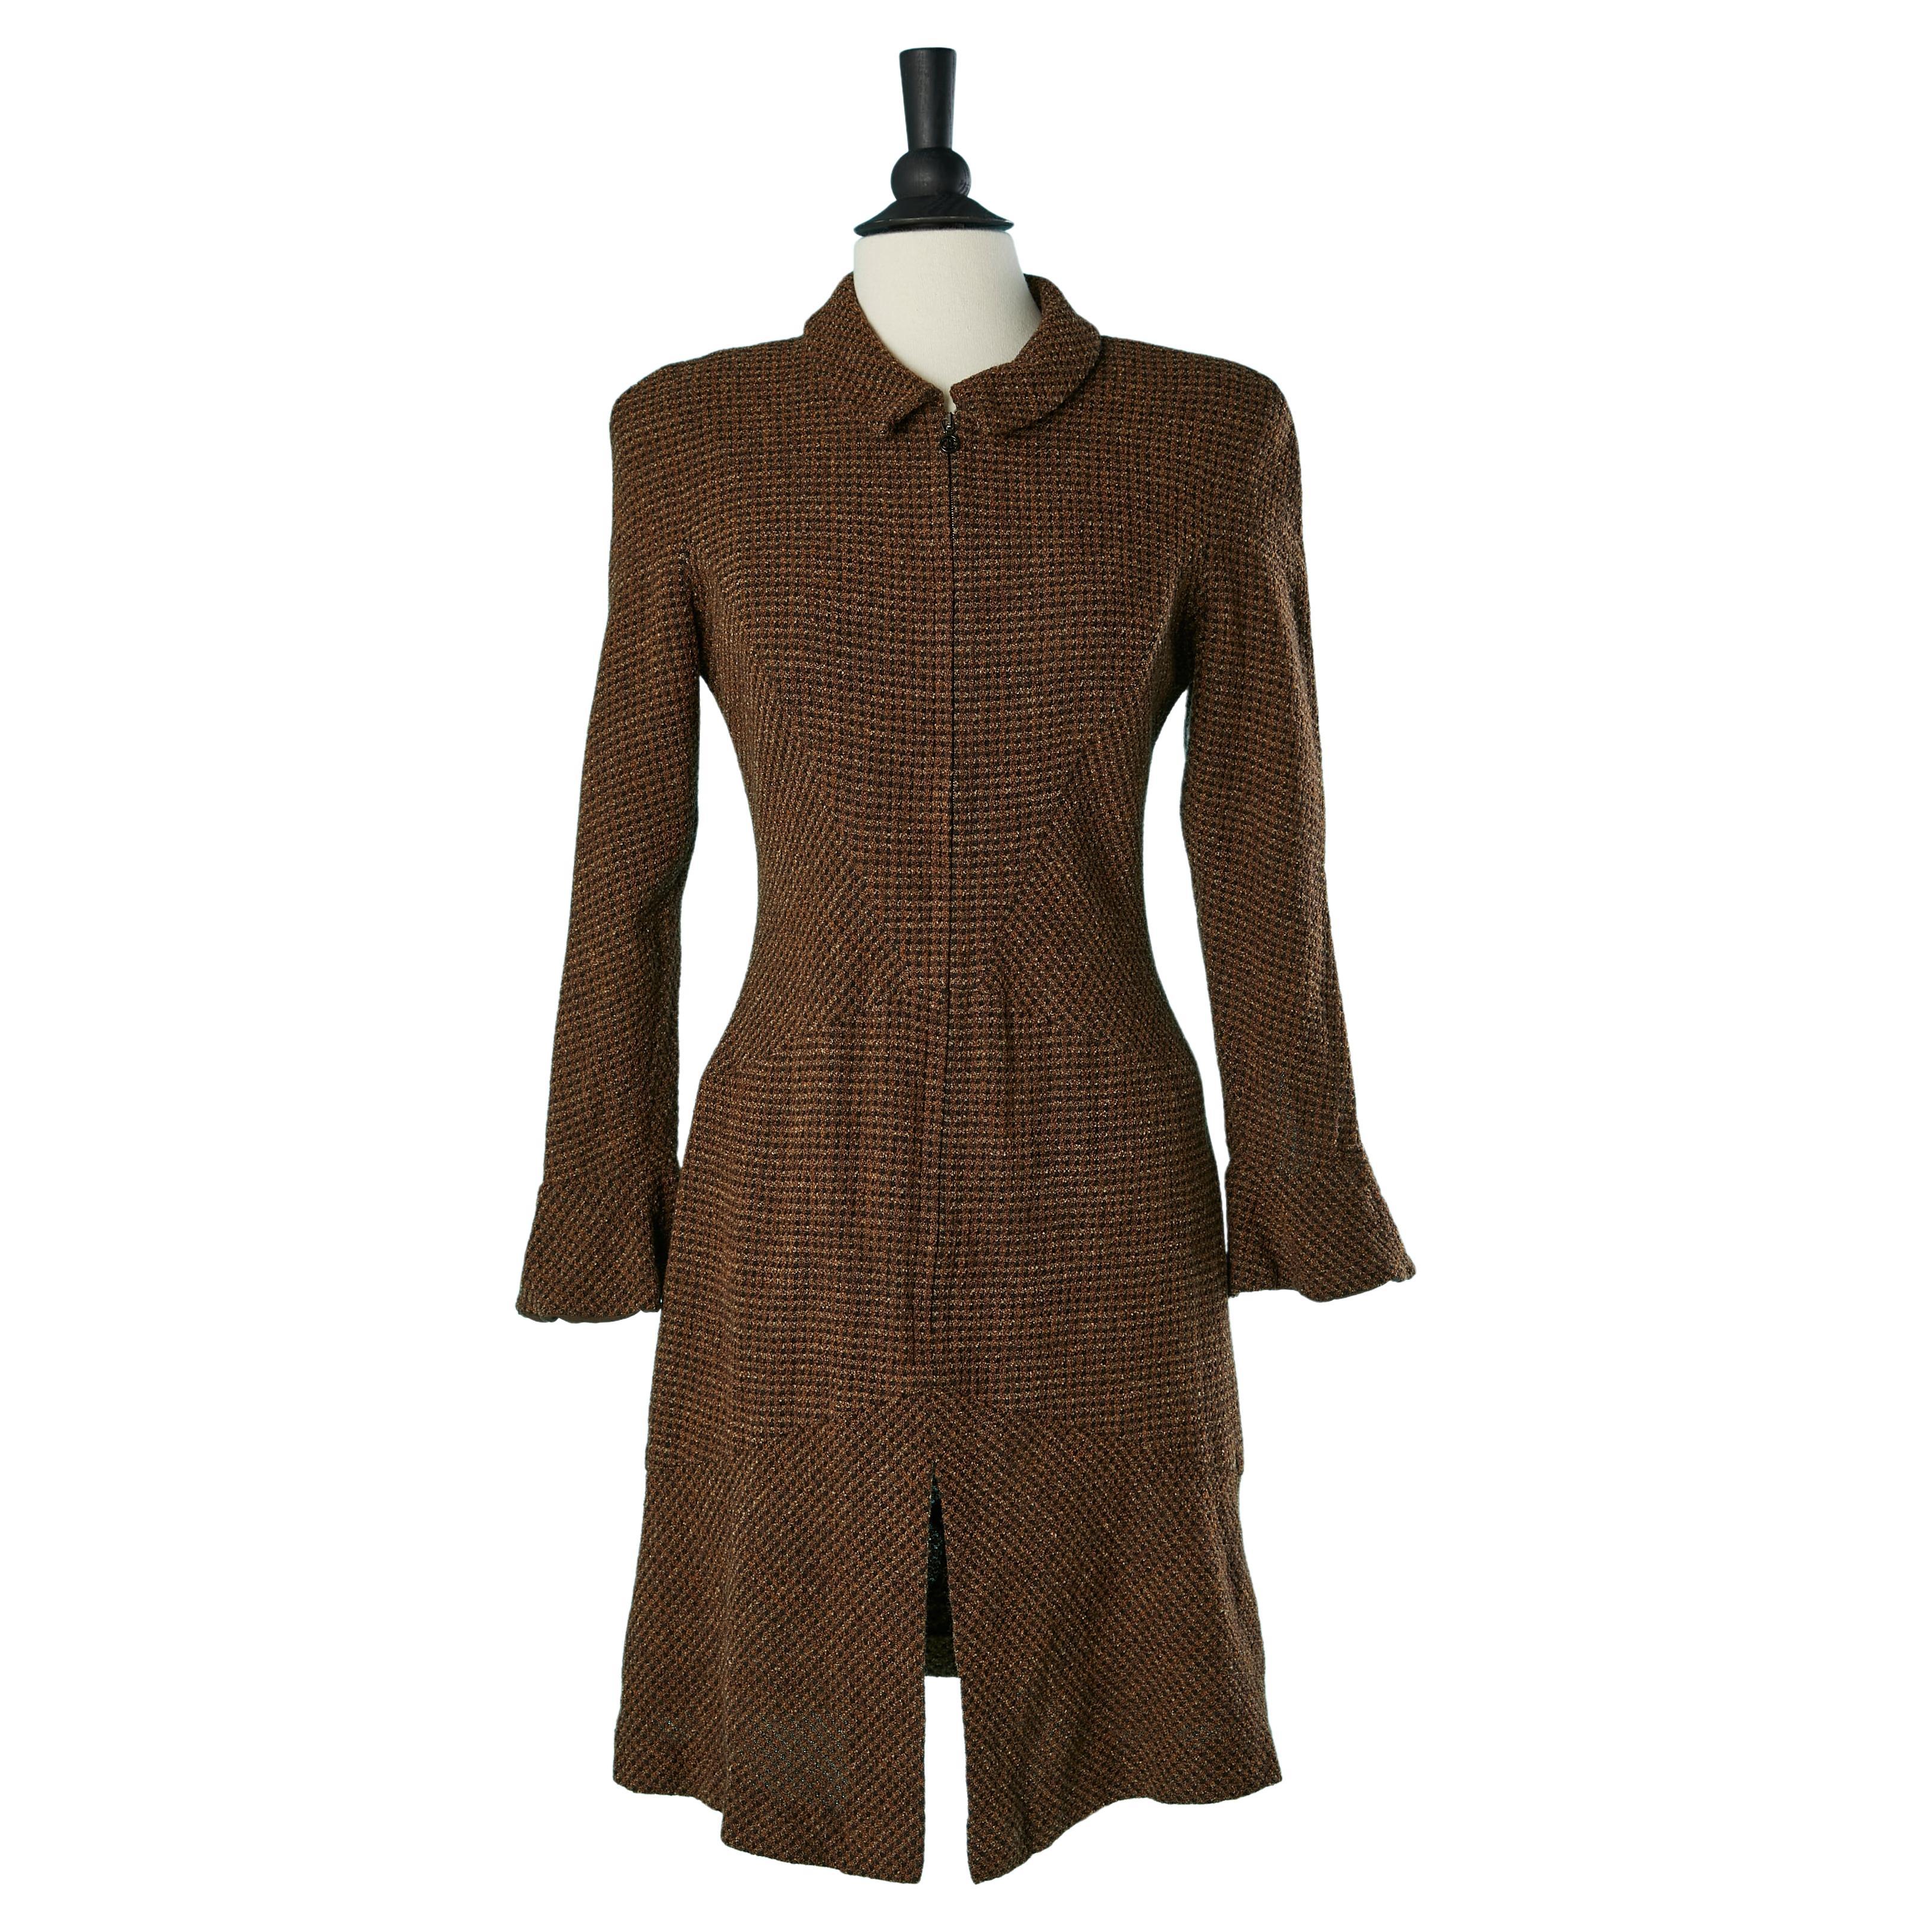 Day dress in brown and black tweed with front zip closure Chanel Boutique  For Sale